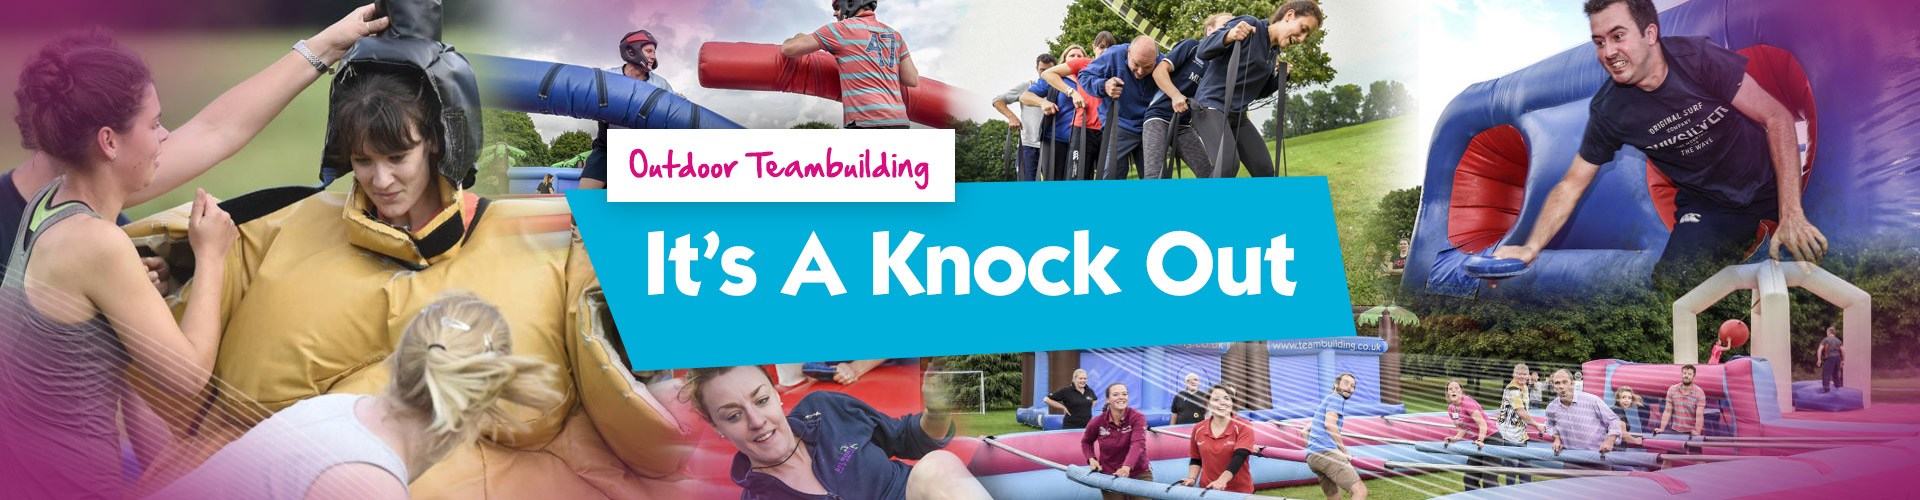 Teambuilding | It's A Knock Out